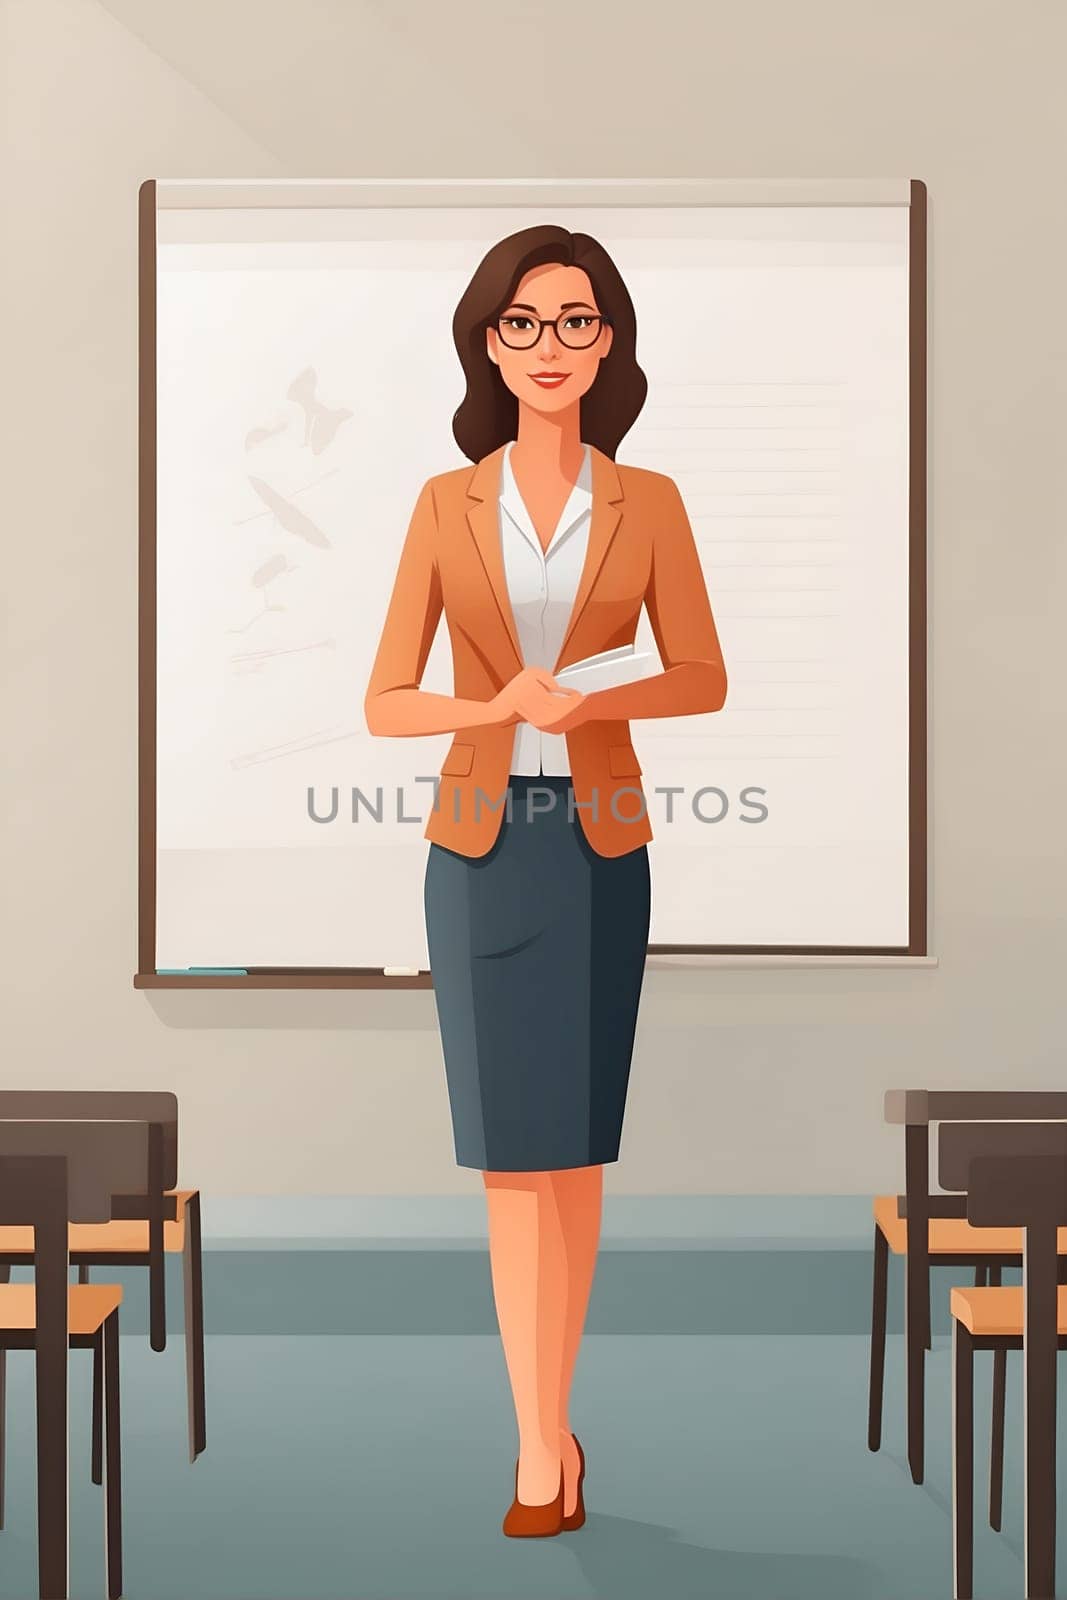 A woman stands by a whiteboard in a classroom, ready to deliver a presentation or teach a lesson.